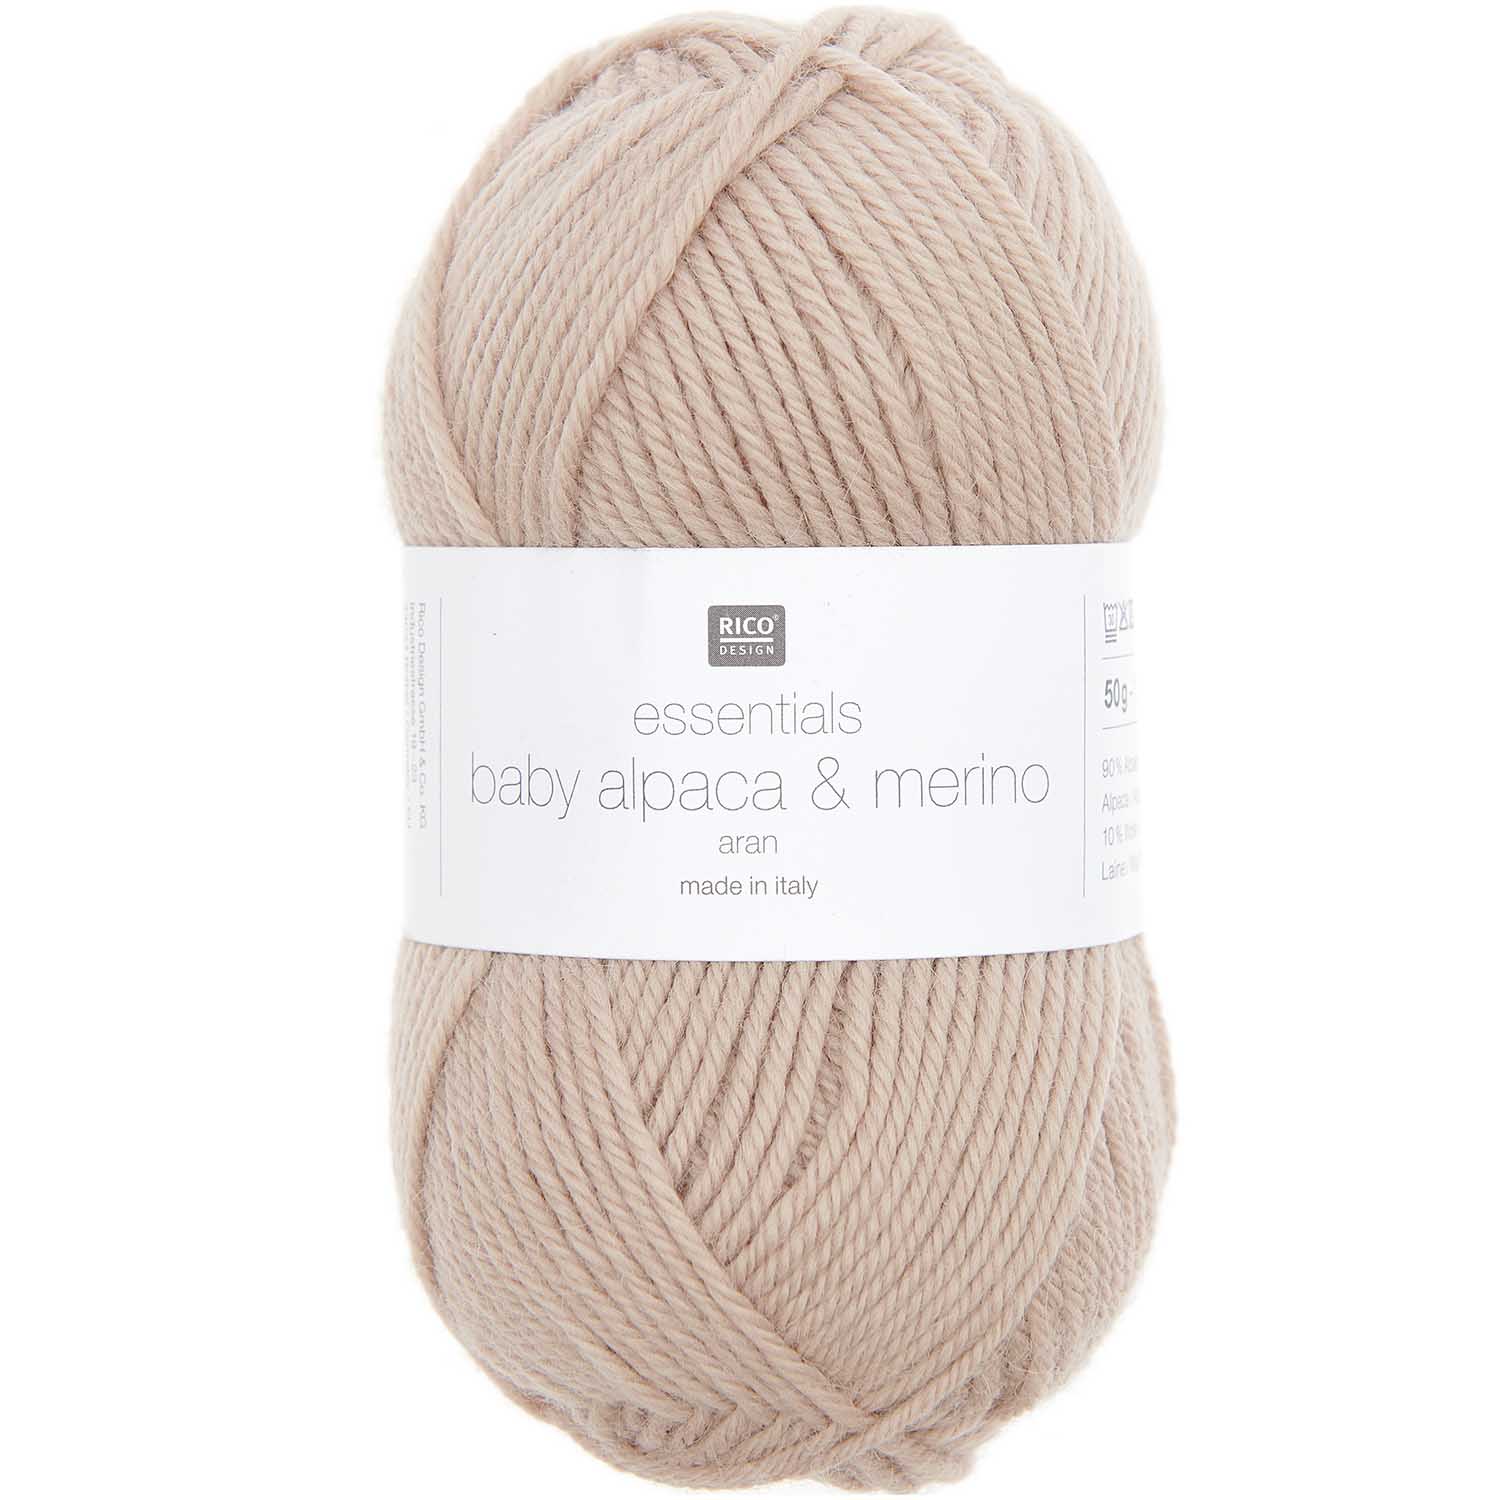 Baby Alpaca Wrist warmers Kit is available to buy online from UK wool shop, Ida's House.